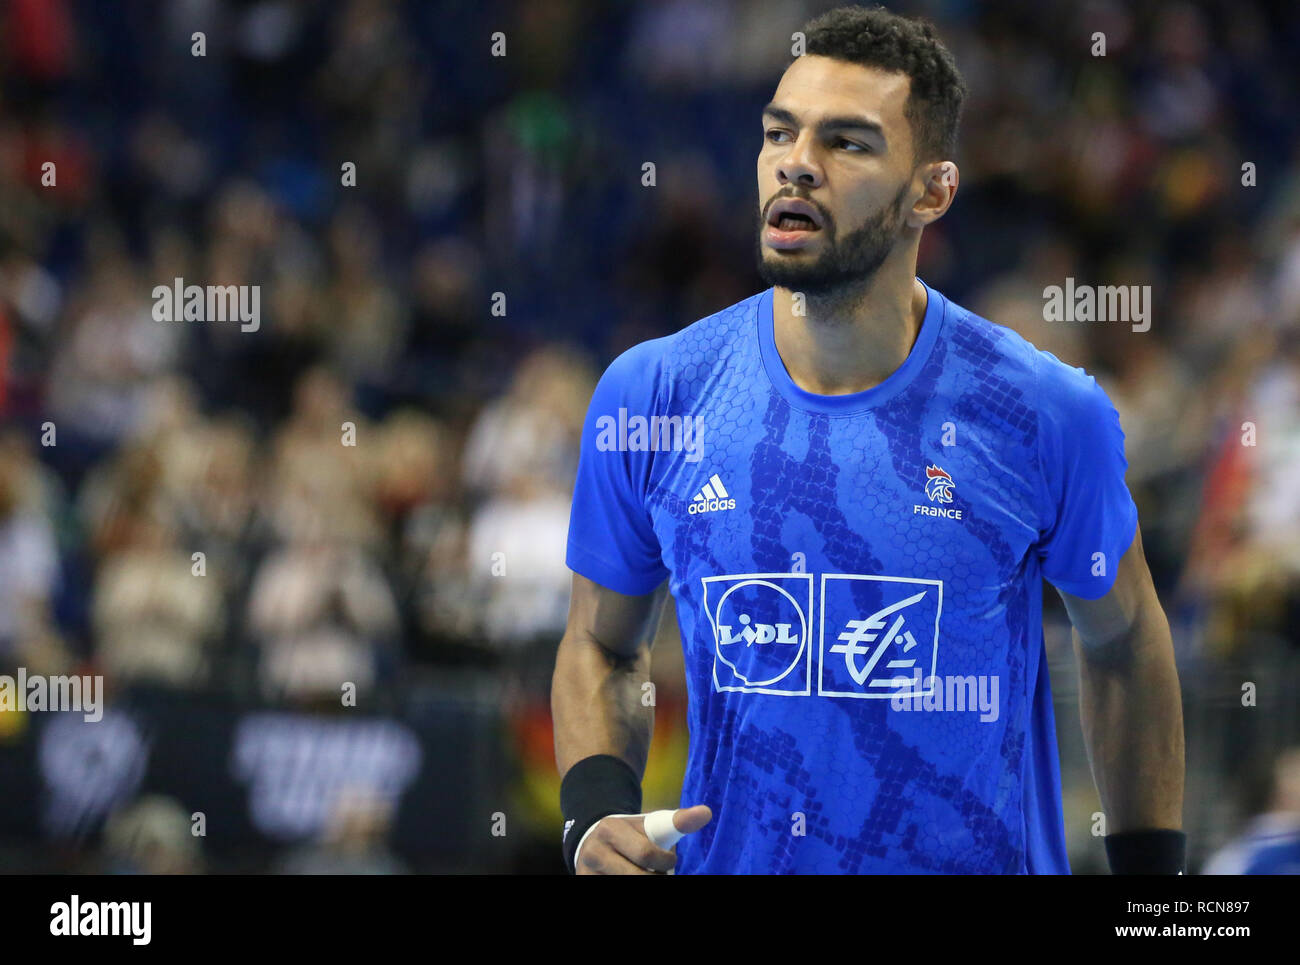 Berlin, Germany. 15th January, 2019.Adrien Dipanda for France during the warm-up before the game Credit: Mickael Chavet/Alamy Live News Stock Photo